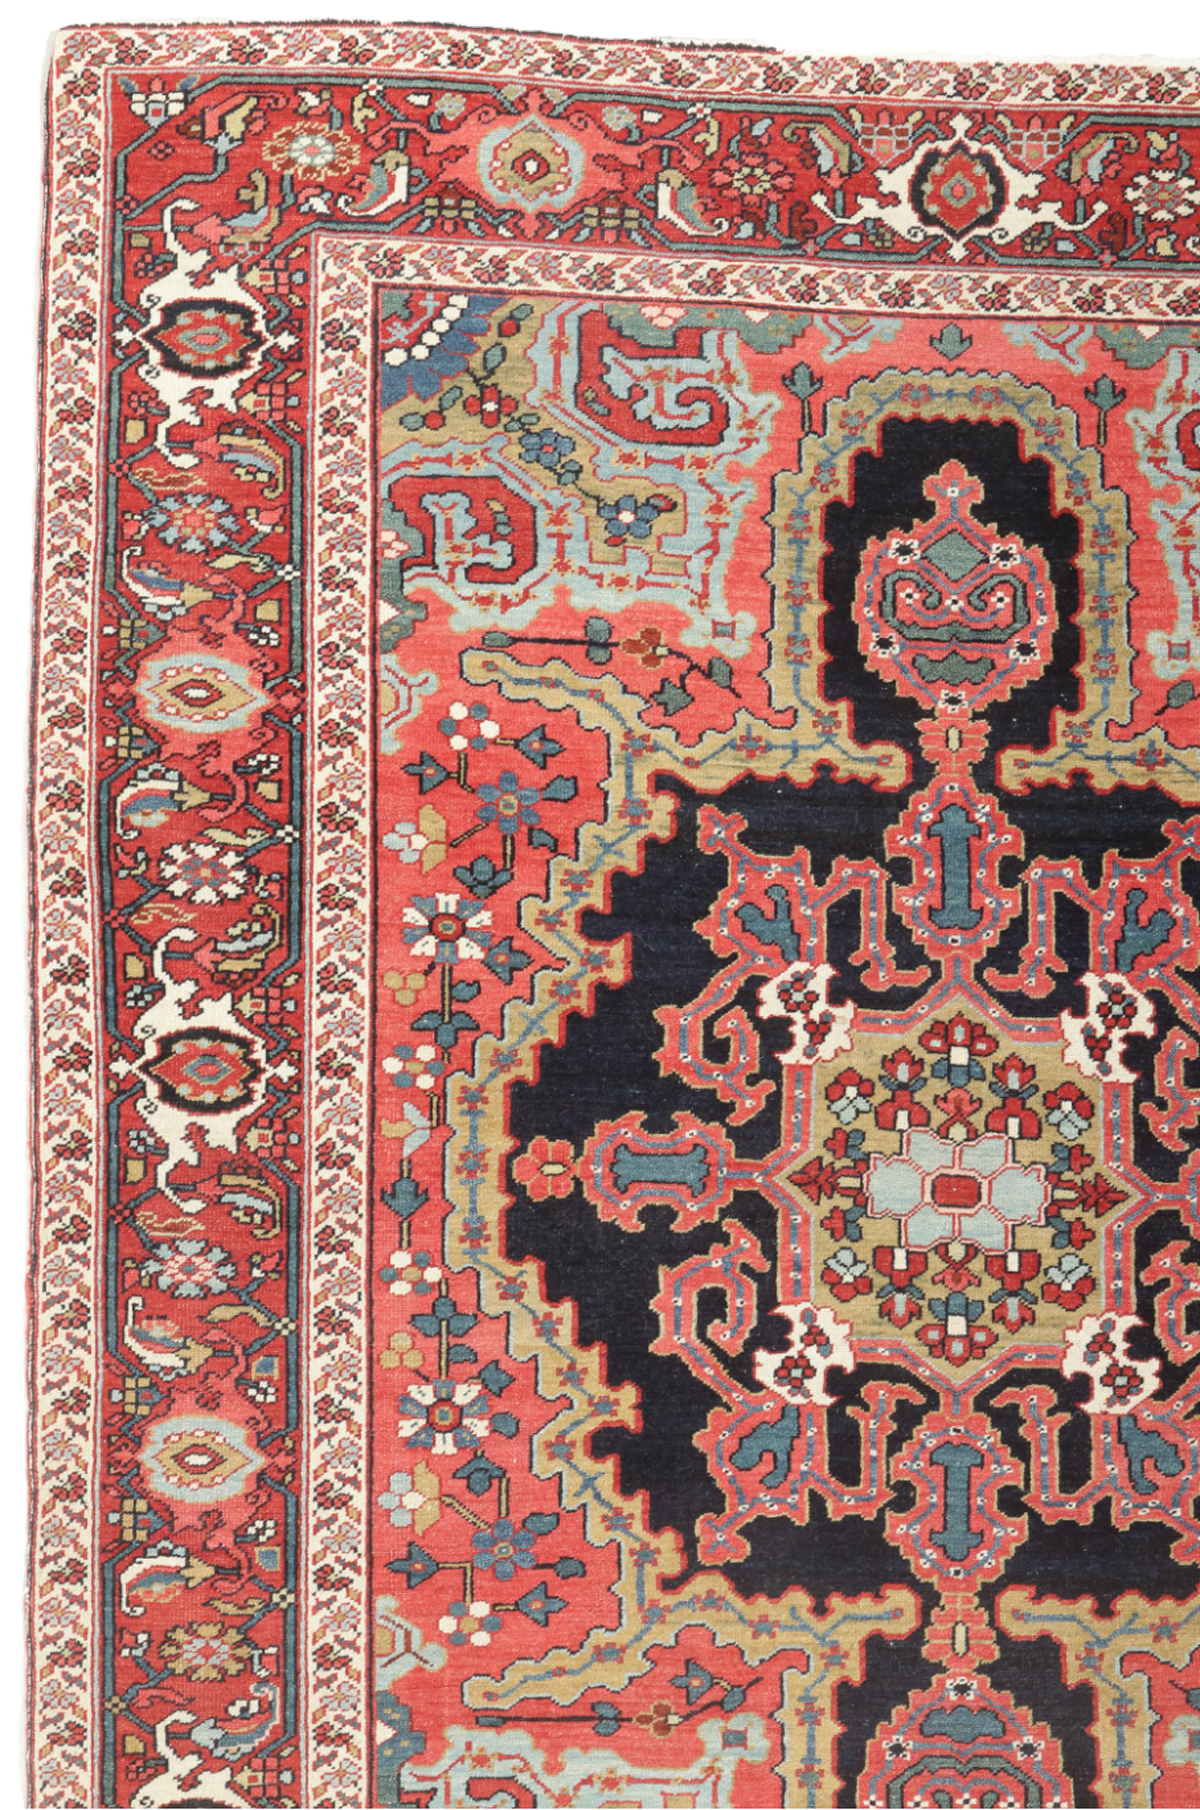 Detail of an antique northwest Persian Heriz "Serapi" rug with a navy medallion with camel and coral trim on a coral color field that is framed by light blue and camel corner spandrels and a brick red Turtle border - Douglas Stock Gallery, antique Oriental rugs Boston, Brookline, Cambridge, Newton, Weston, Wellesley, Natick,MA area Oriental rugs